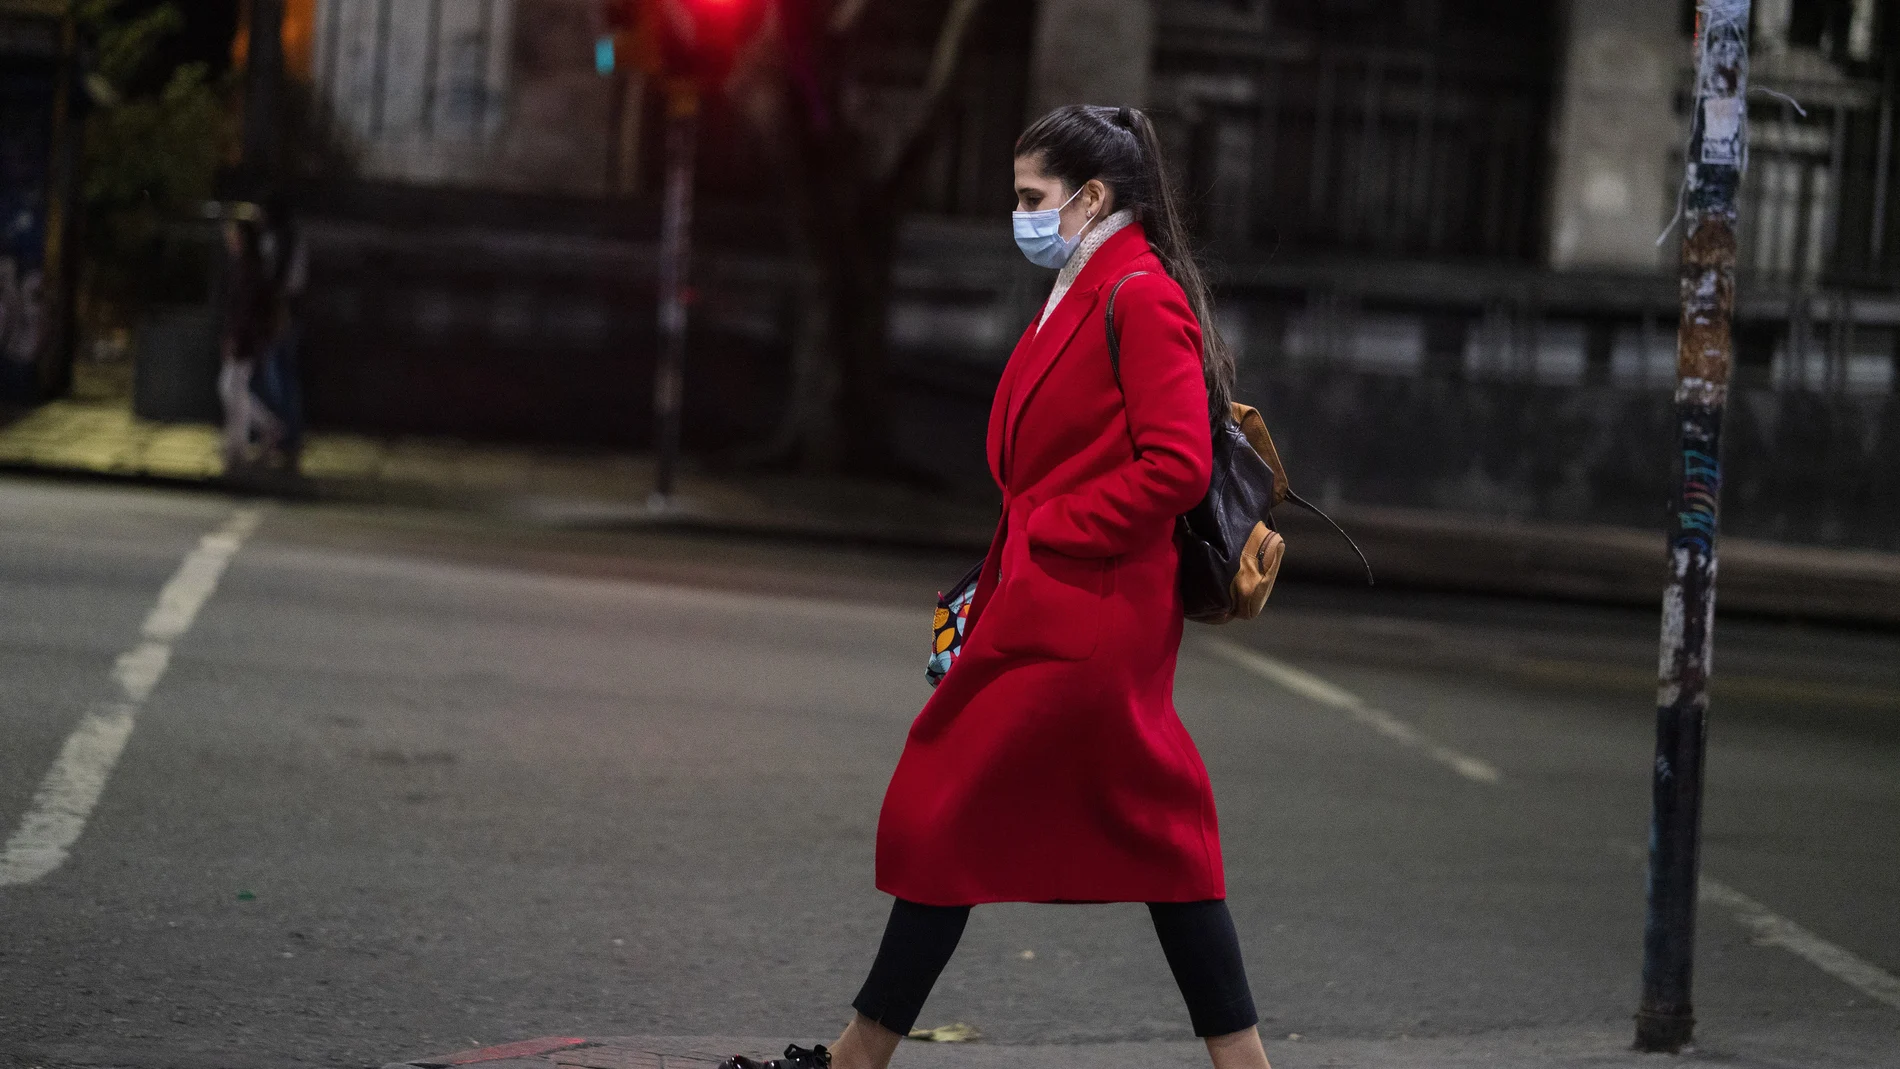 A woman wearing a protective face mask as a measure to curb the spread of the new coronavirus, walks in downtown Montevideo, Uruguay, Monday, June 15, 2020. Life is slowly returning to normal in Uruguay, while Latin America is still in the middle of the storm fighting COVID-19. In Montevideo, where there are only three confirmed cases, businesses reopened its doors weeks ago. (AP Photo/Matilde Campodonico)